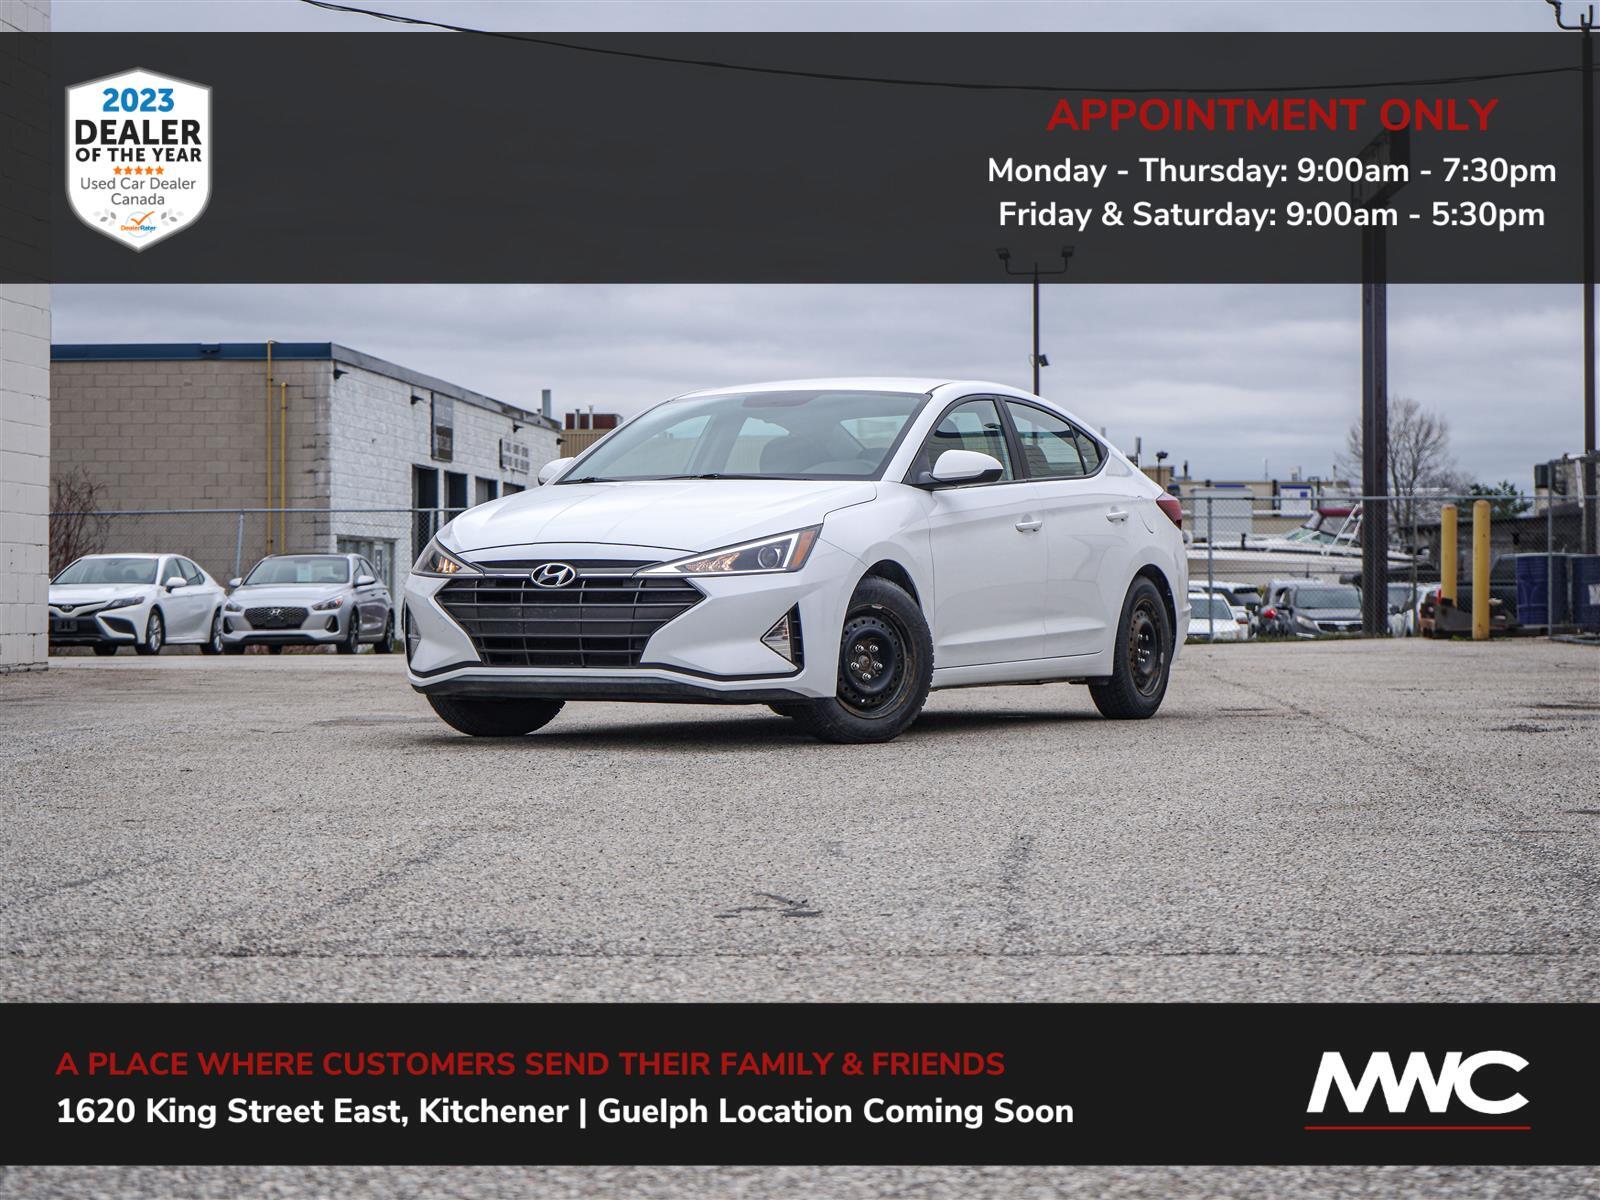 2020 Hyundai Elantra SE | IN GUELPH, BY APPT. ONLY